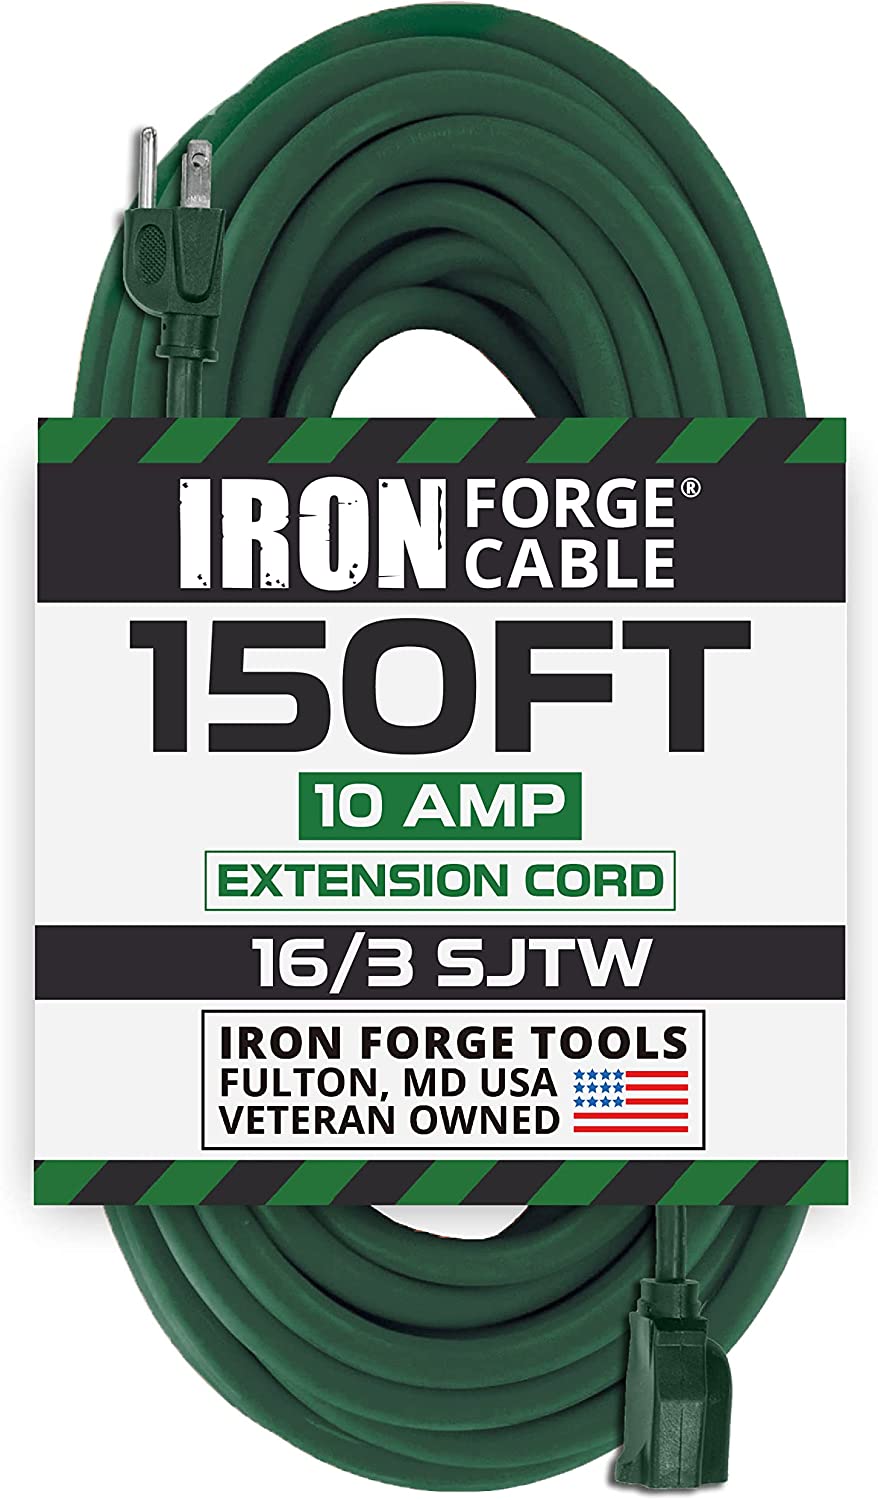 EXTENSION CORDS - iron forge tools